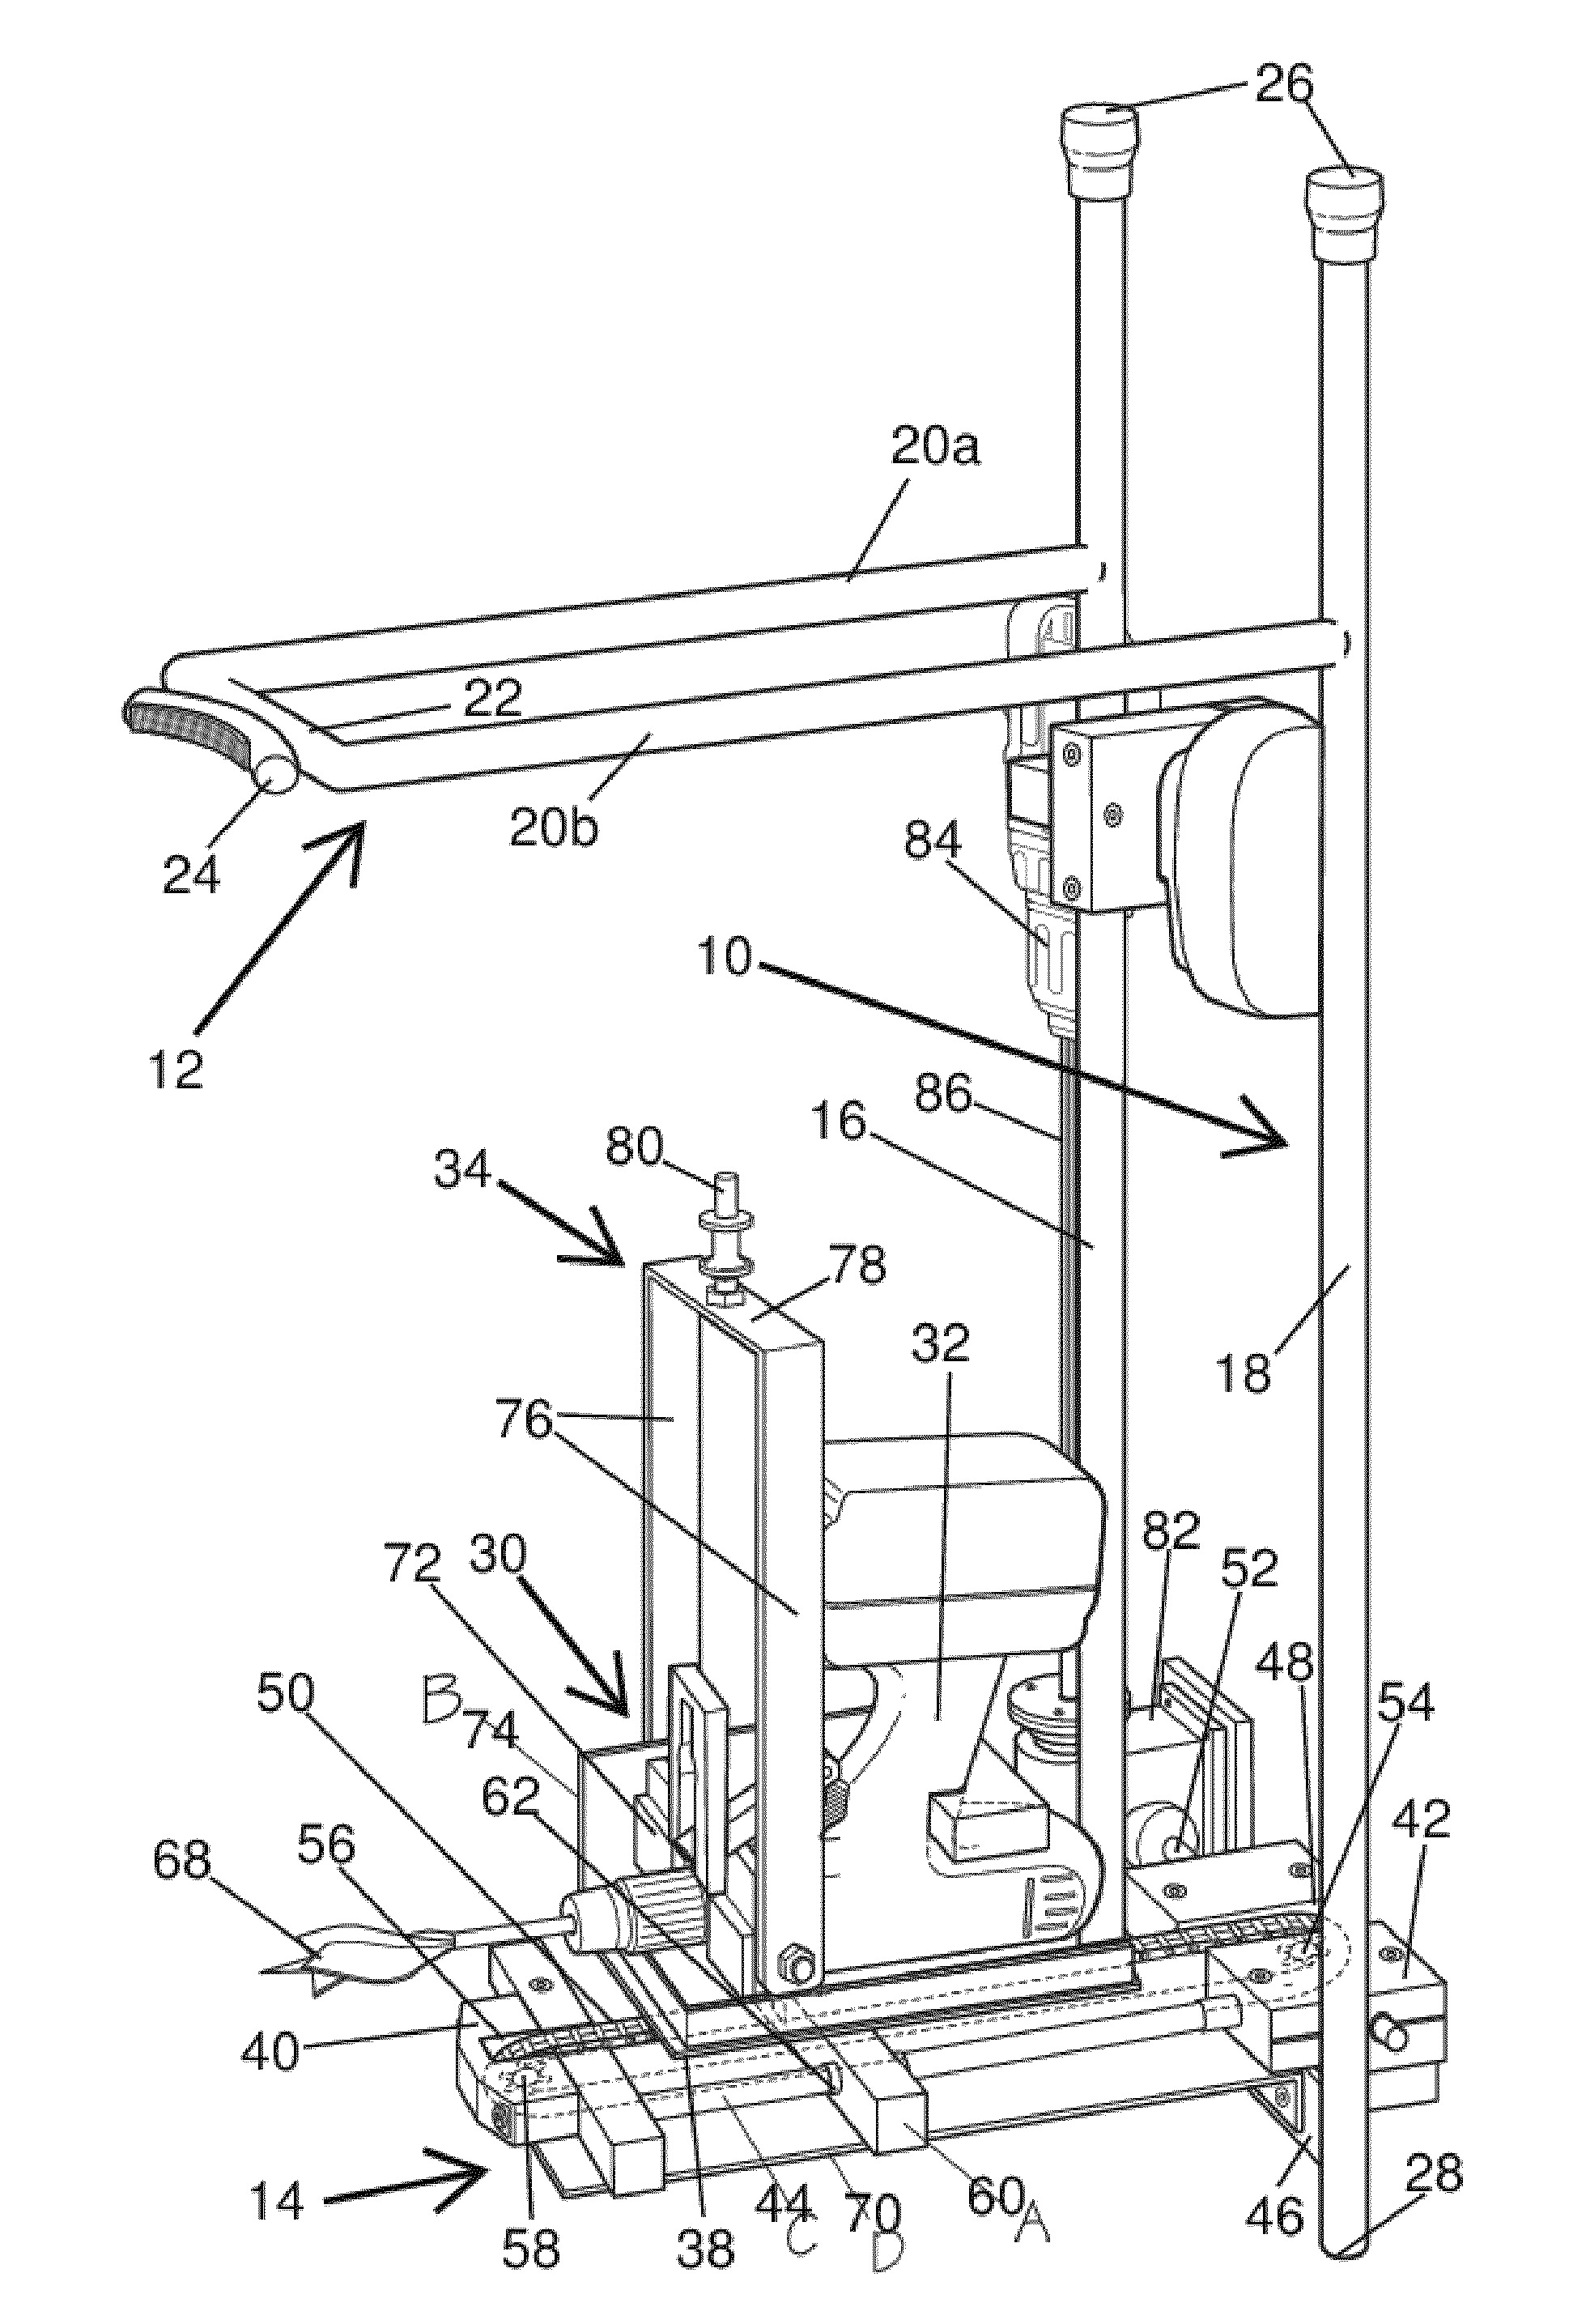 Apparatus for Tapping Trees